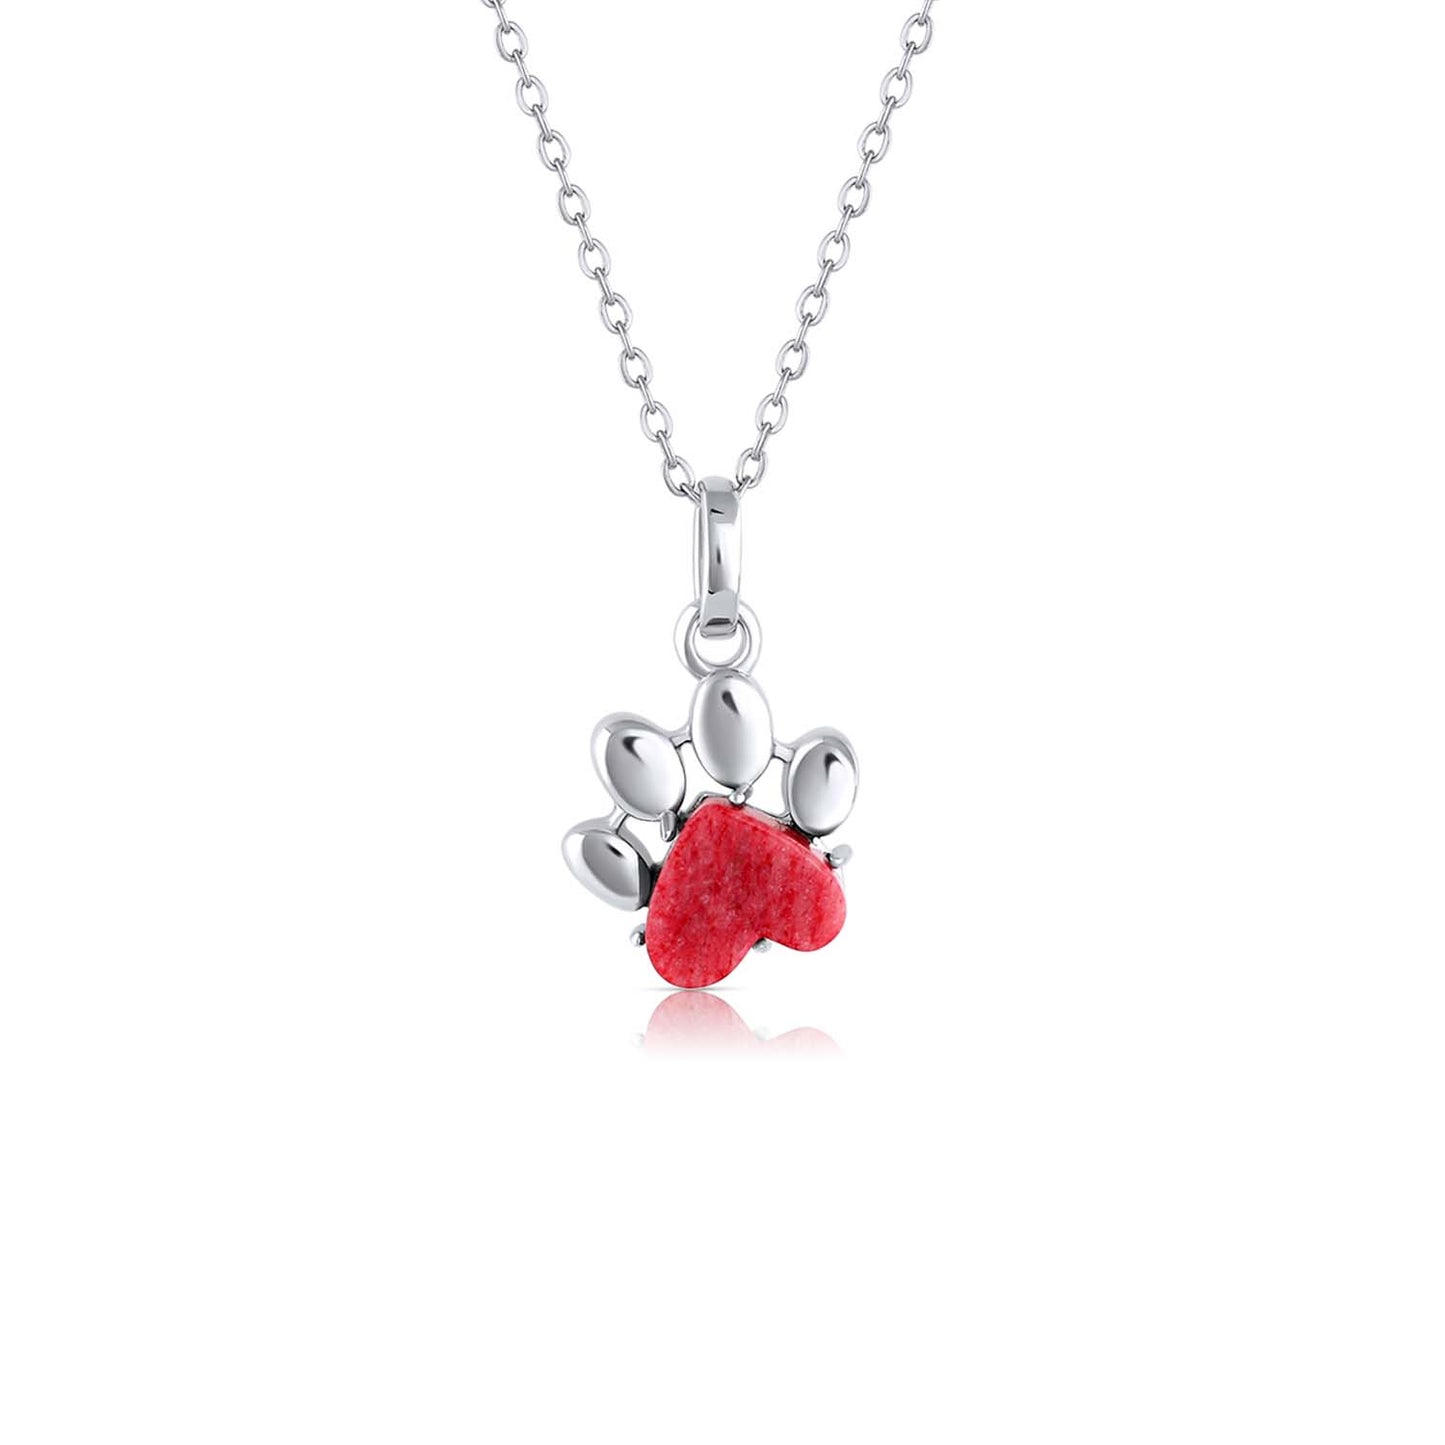 Pet Paw Charm Necklace in Red Feldspar. Made by Born to Rock Jewelry